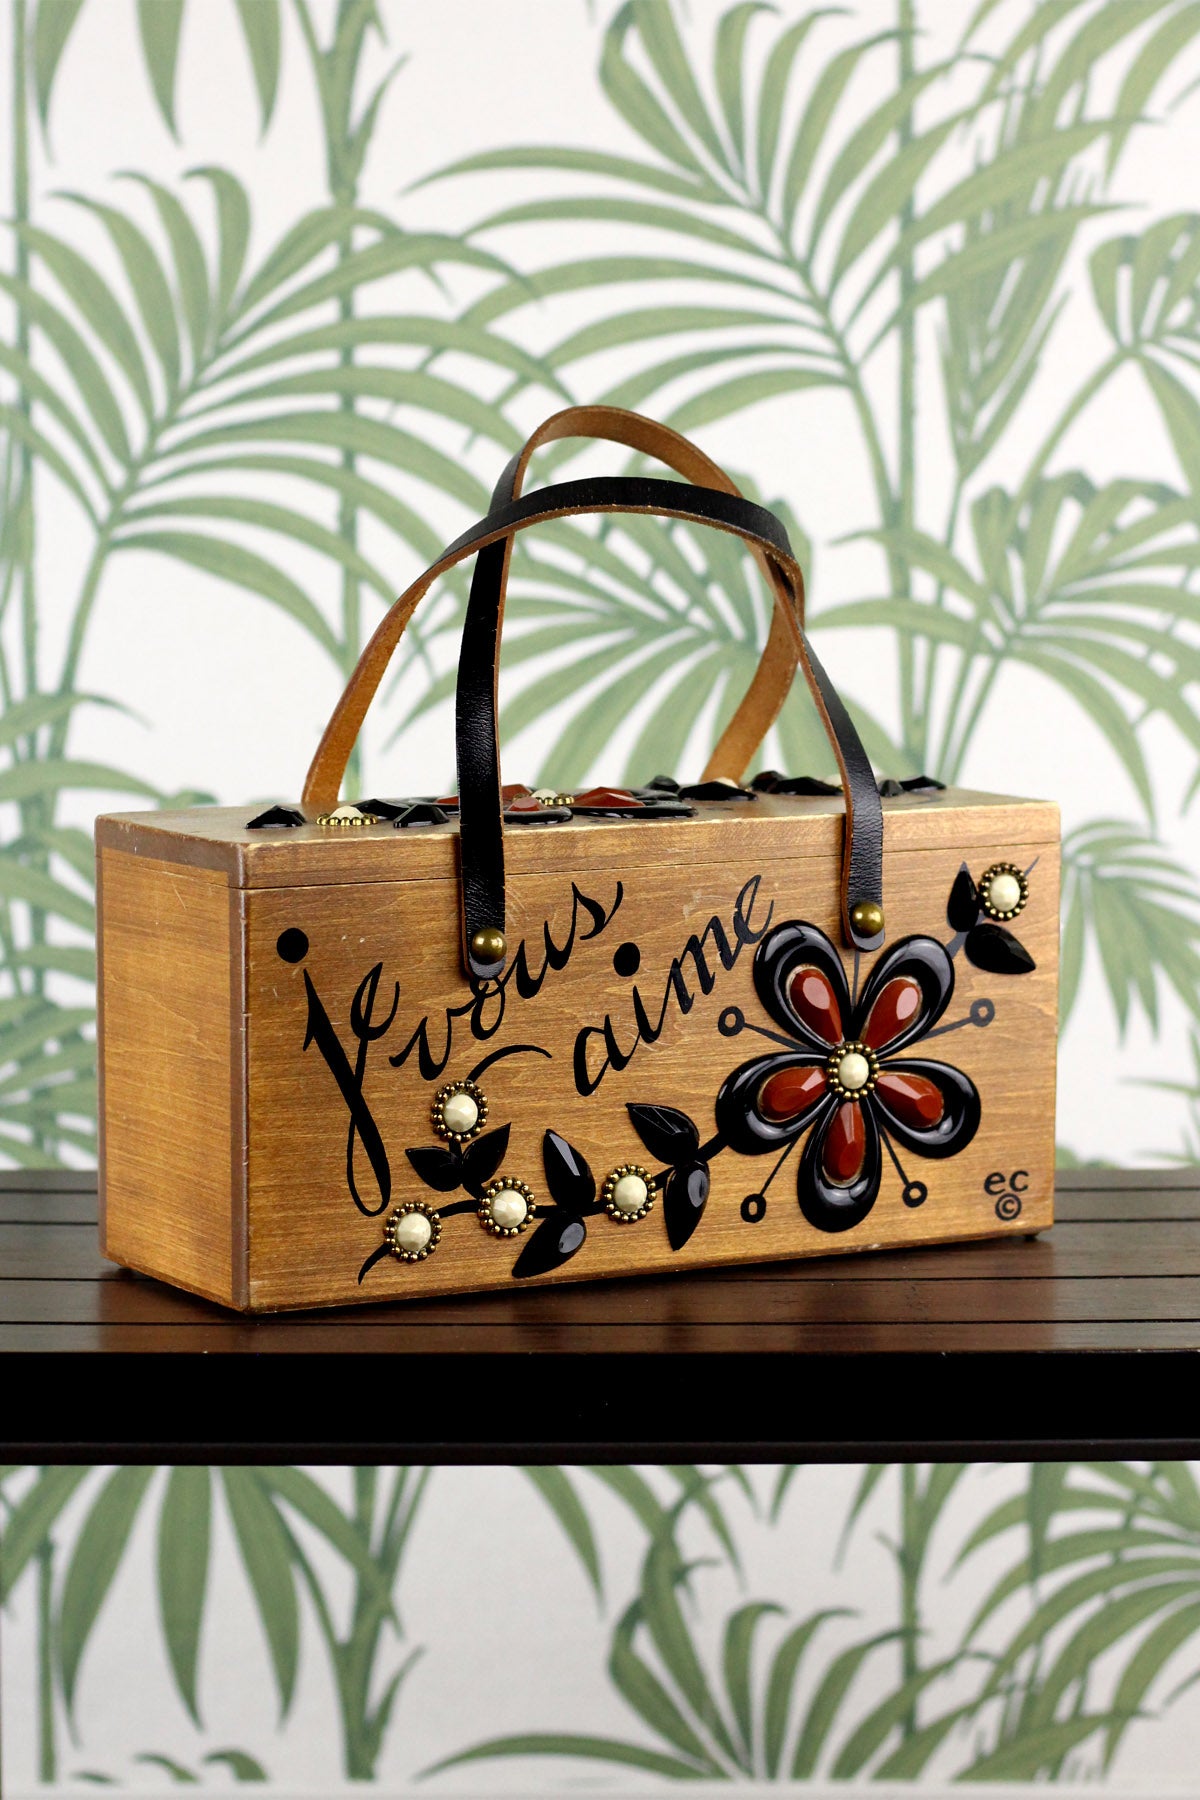 Vintage Style Sea Spray Carry Wooden Box Bag With Mirror